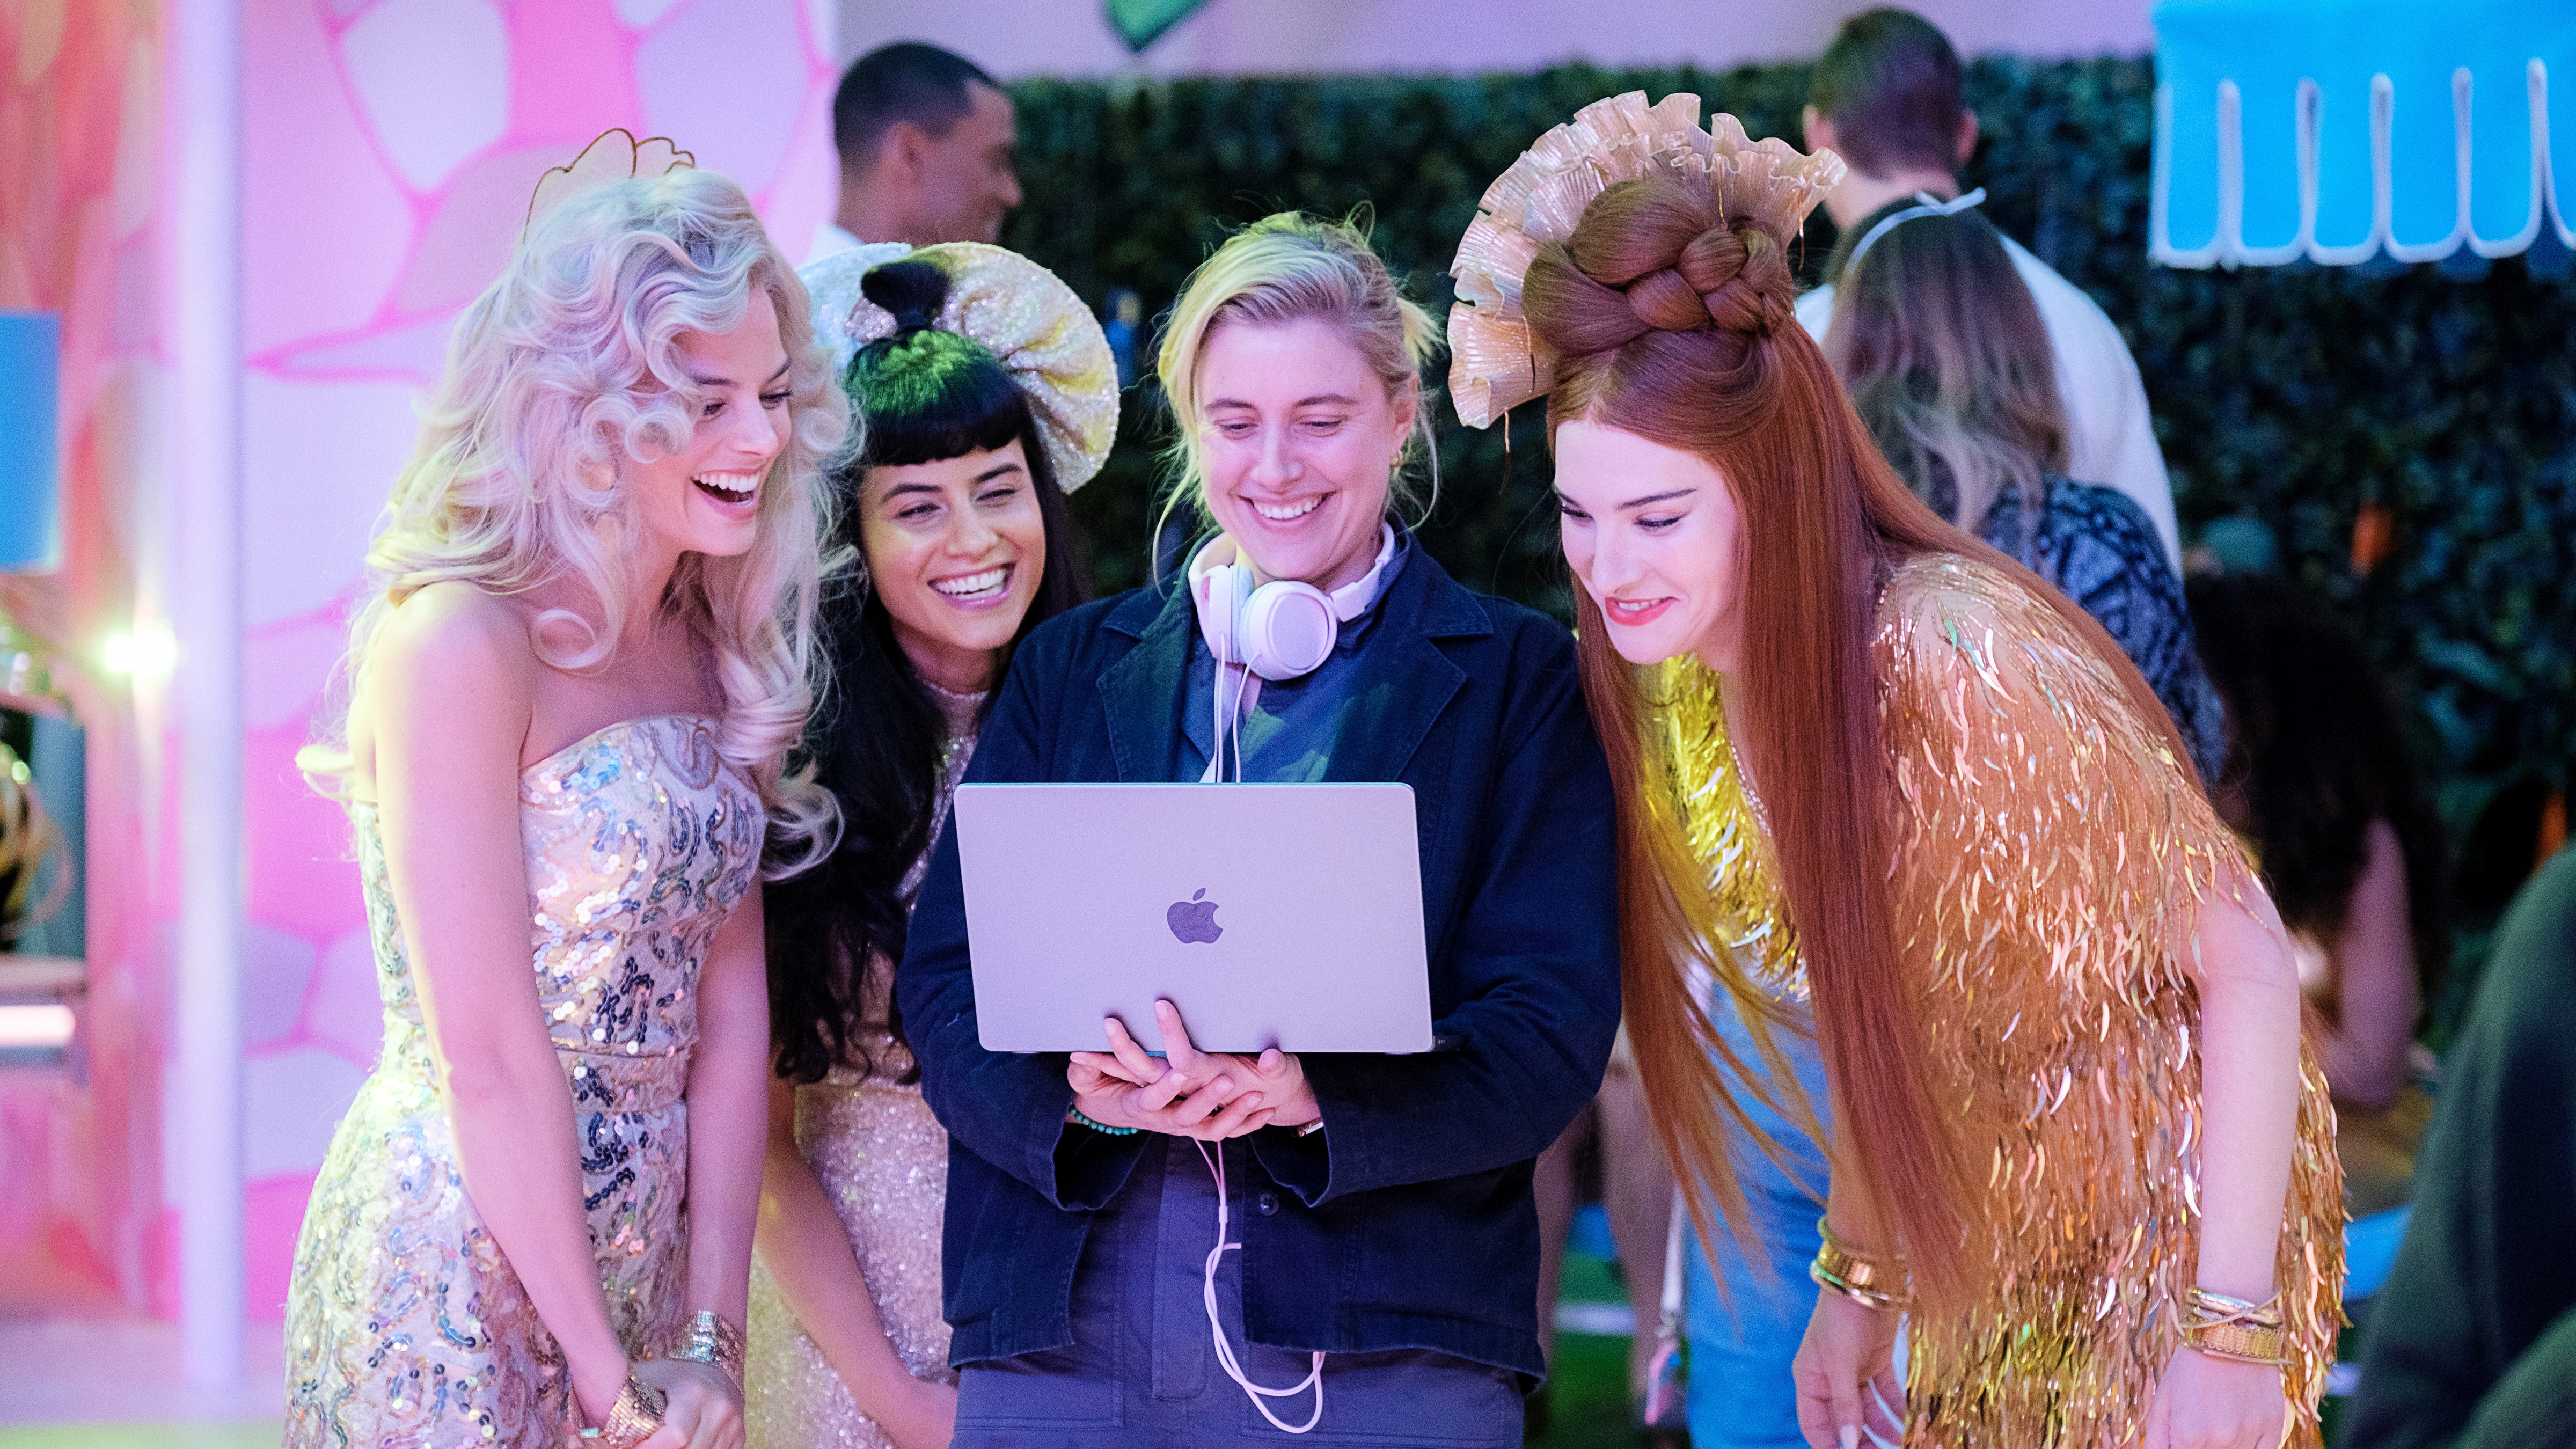 An image of Greta Gerwig on the set of Barbie, looking at a laptop, surrounded by Barbie stars (including Margot Robbie)